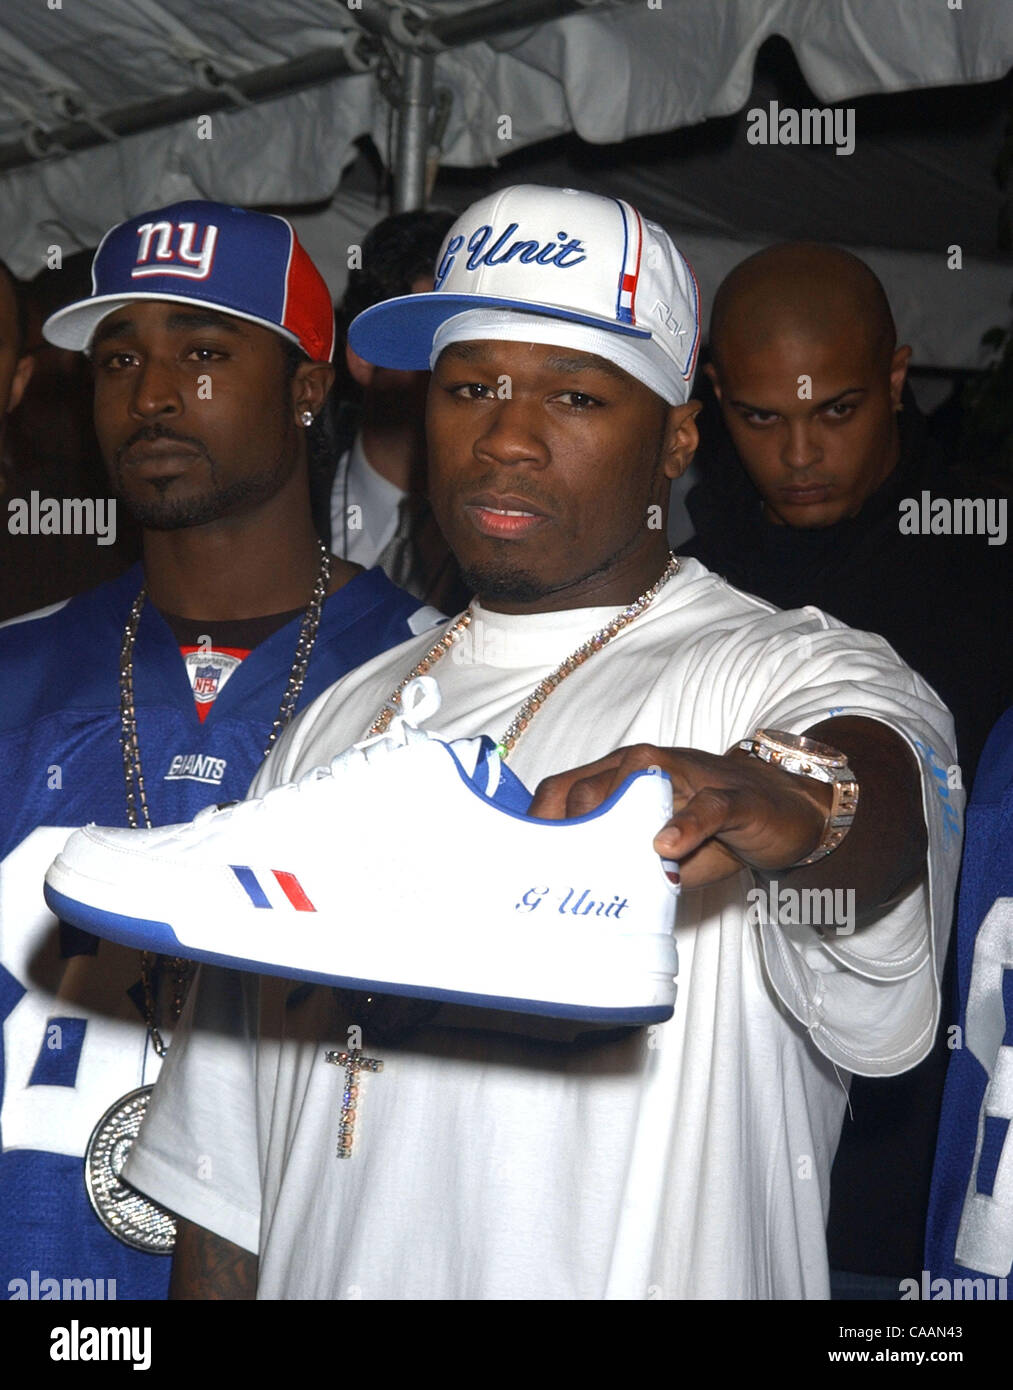 Nov 04, 2003; New York, NY, USA; Rapper 50 CENT at the launch for 'Answer  7' and G6 footwear hosted by 50 Cent and Reebok at Capitale Stock Photo -  Alamy